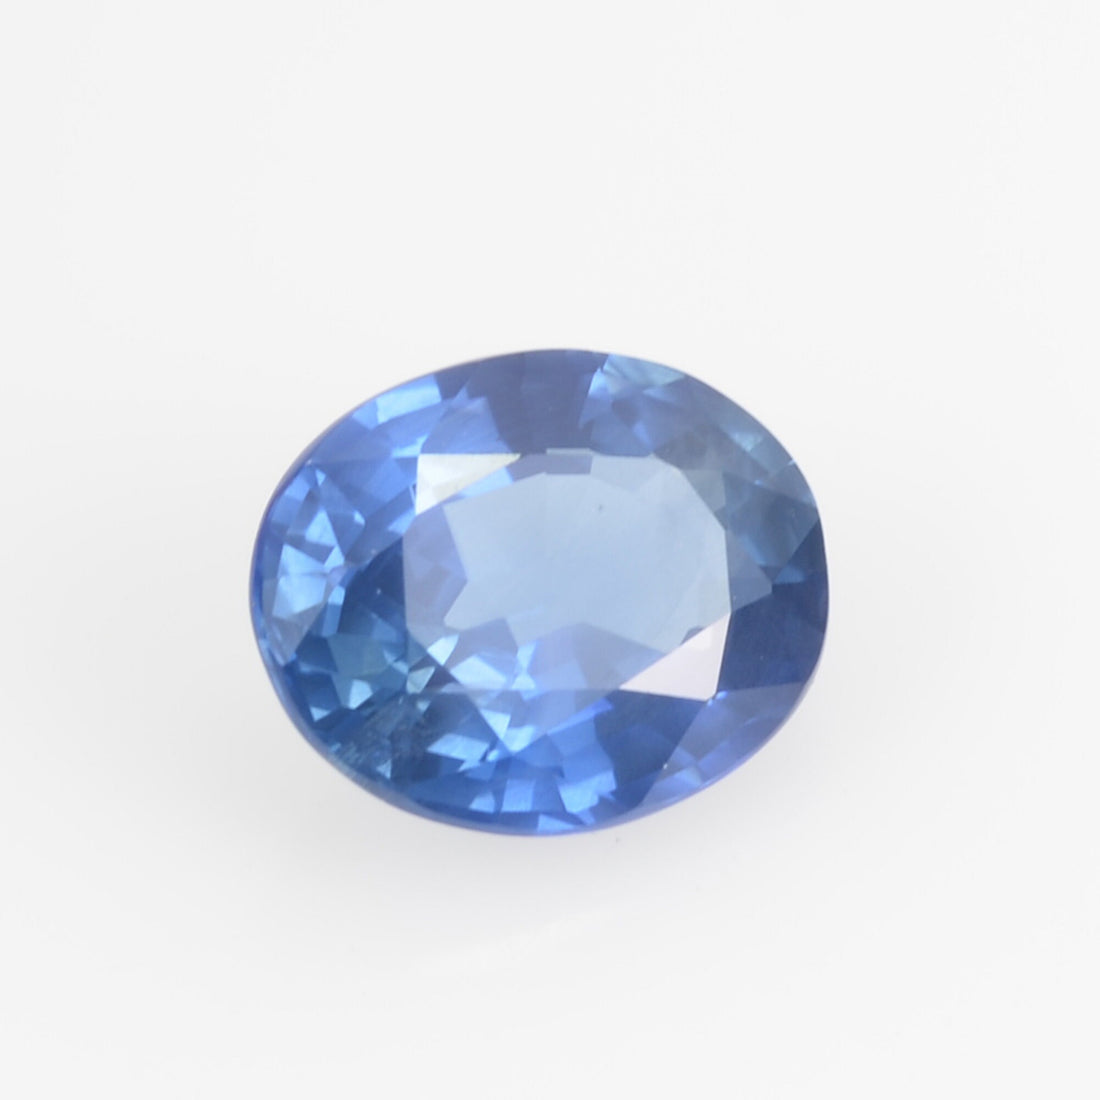 0.95 Cts Natural Blue Sapphire Loose Gemstone Oval Cut